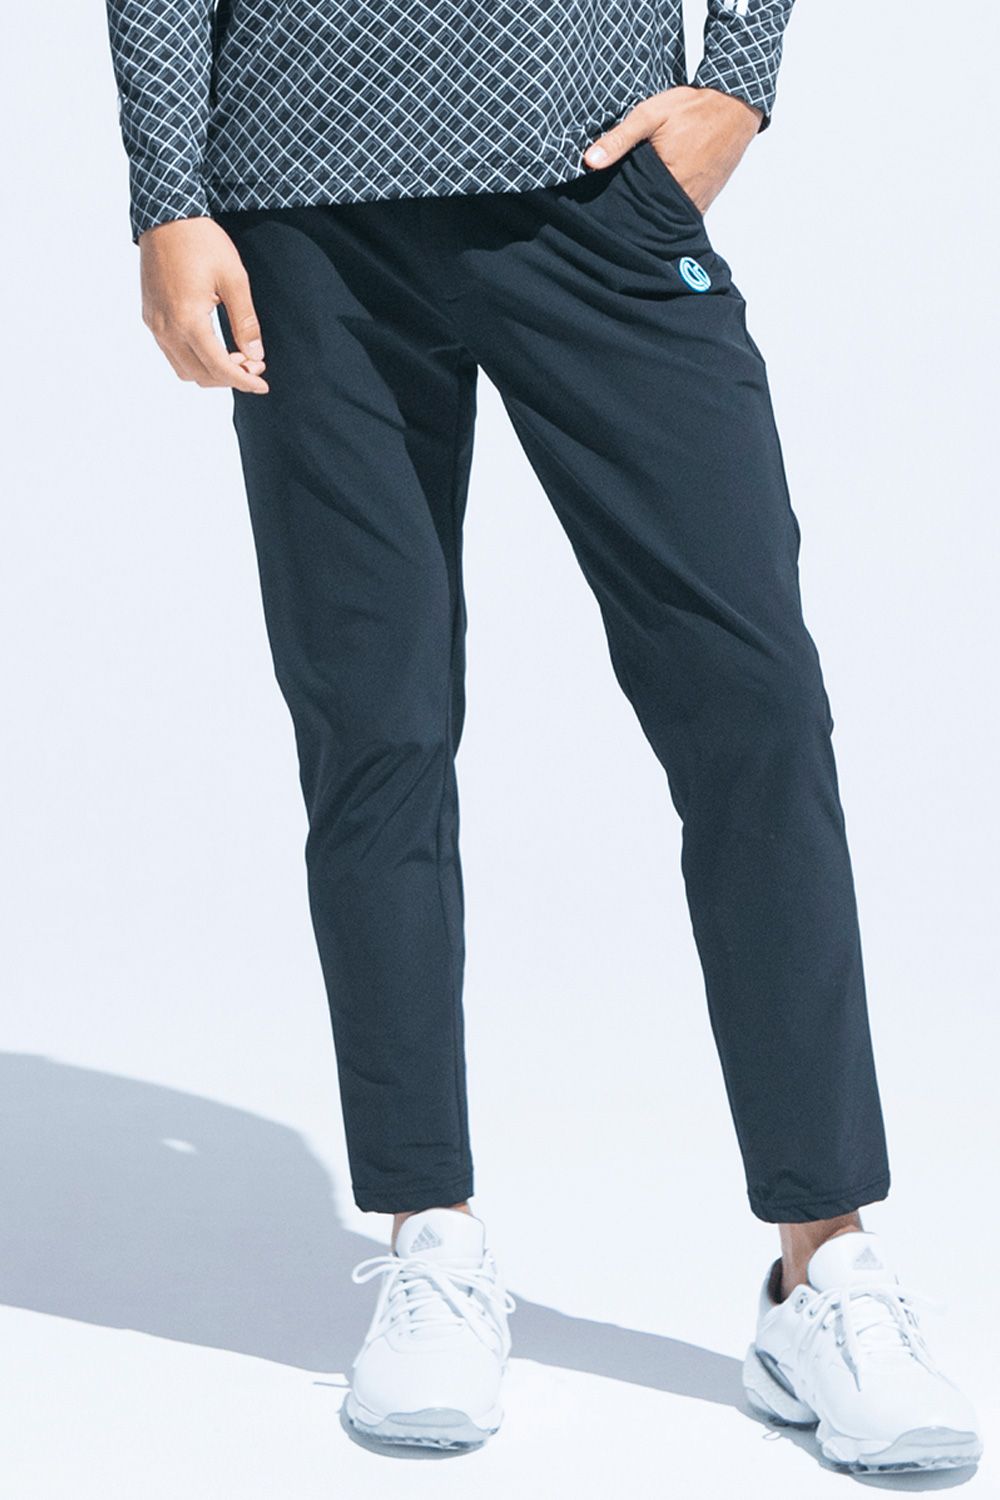 CPG GOLF - DRY TOUCH SILHOUETTE PANTS / ドライタッチ シルエット